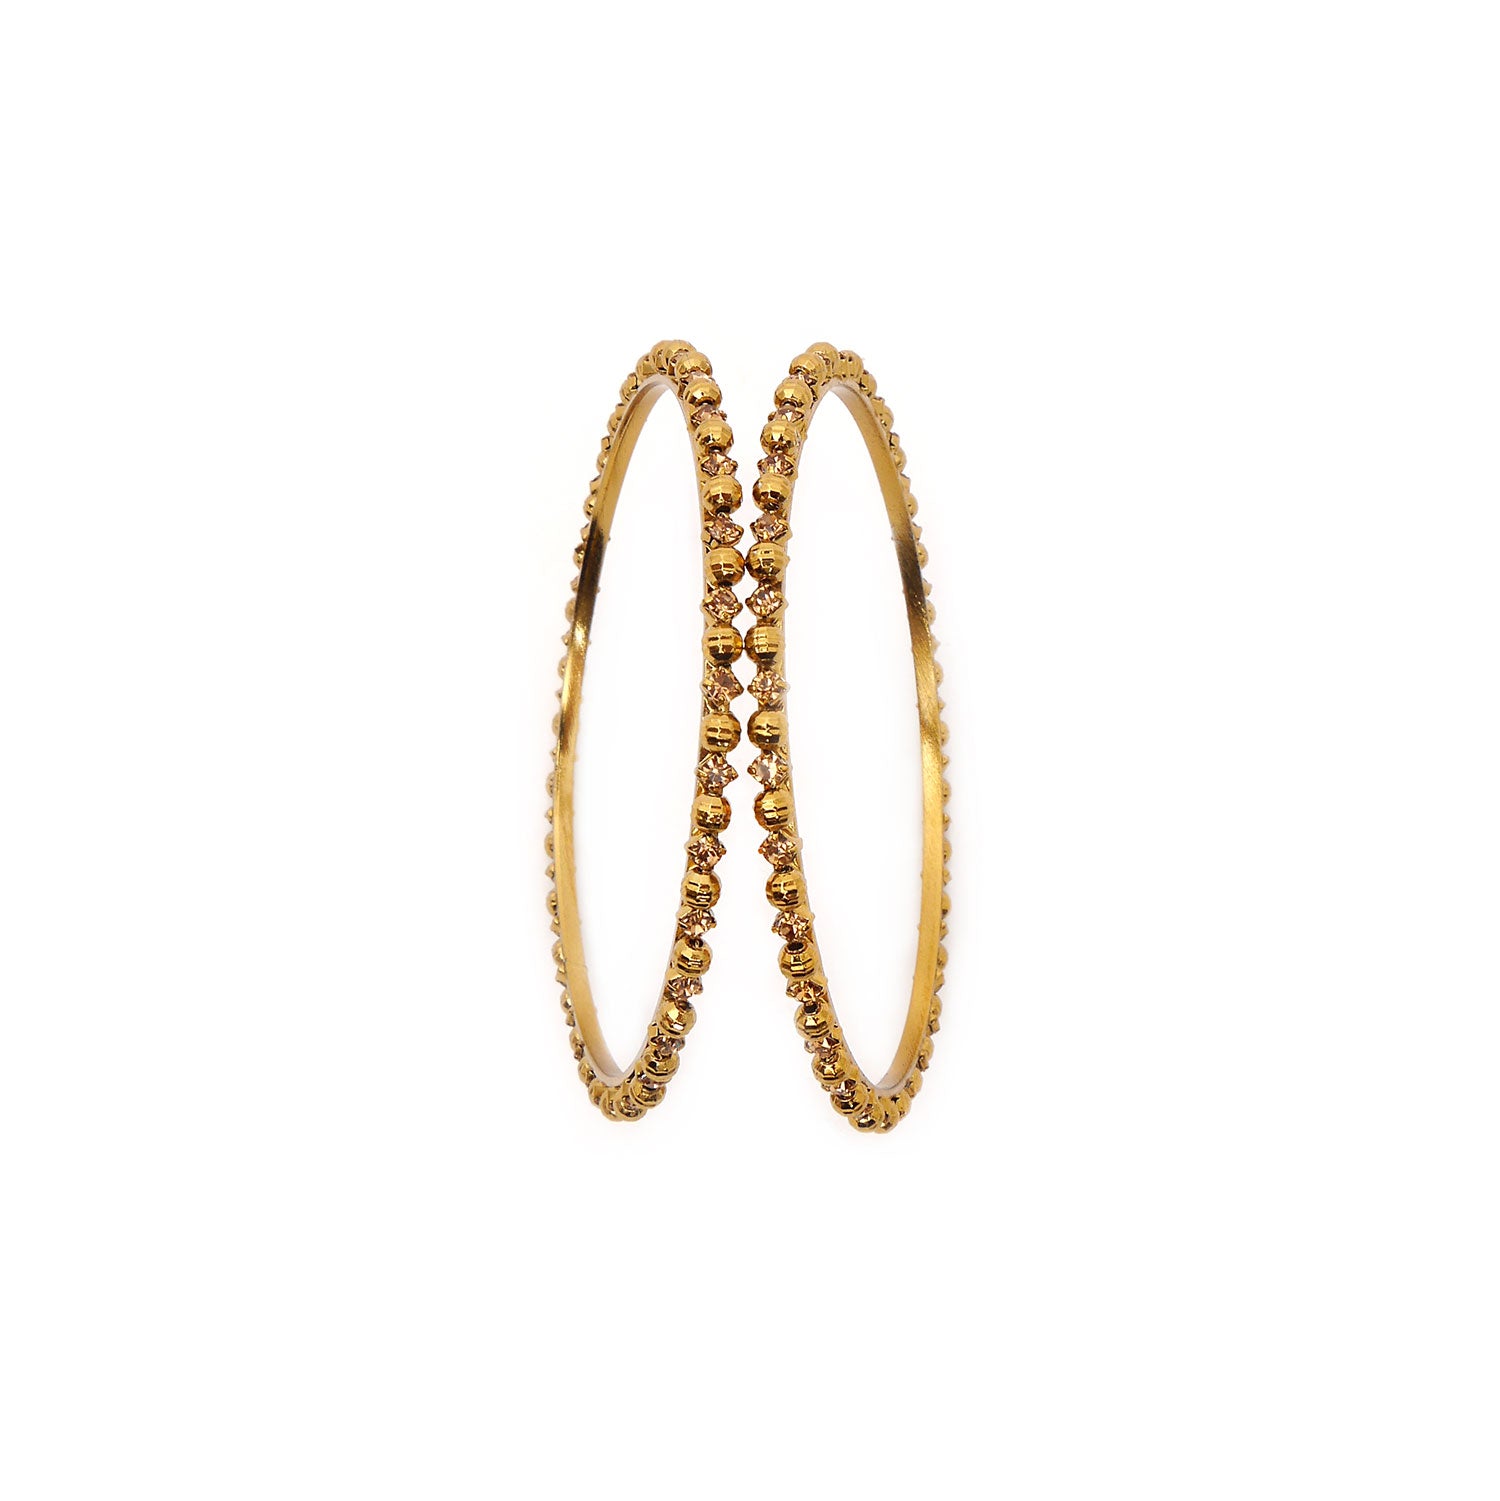 Facet Beaded Champagne Thin Bangles